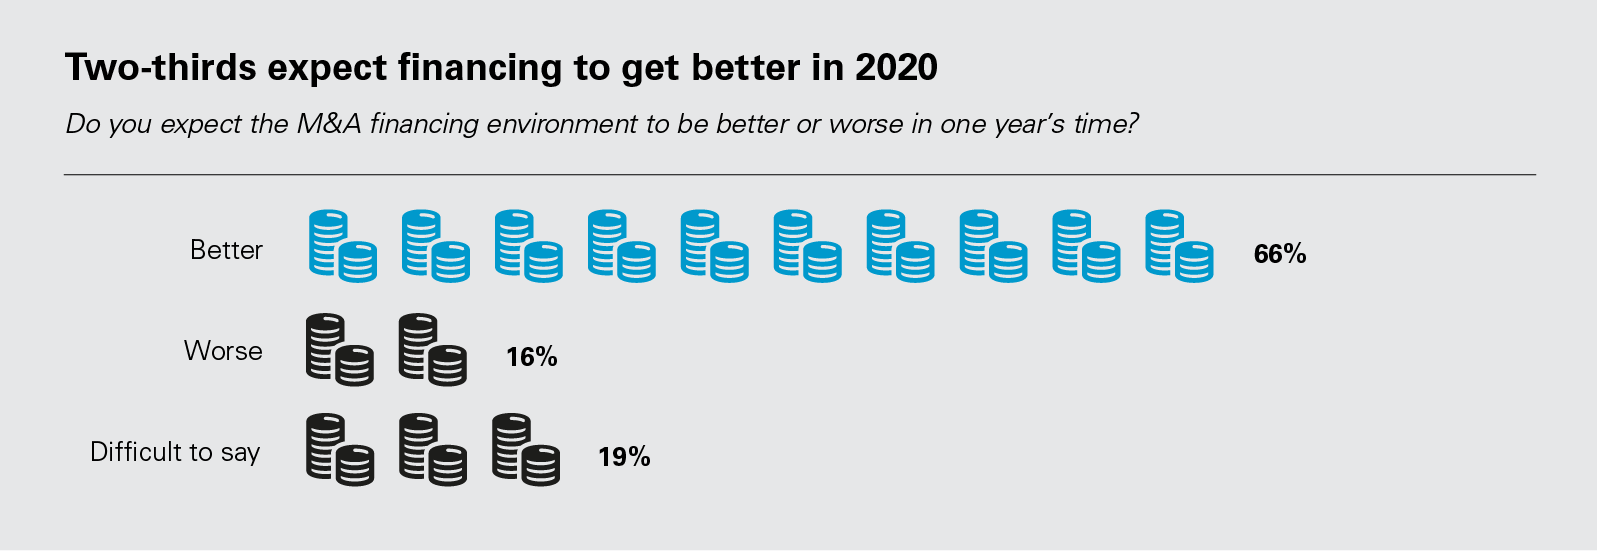 Two-thirds expect financing to get better in 2020